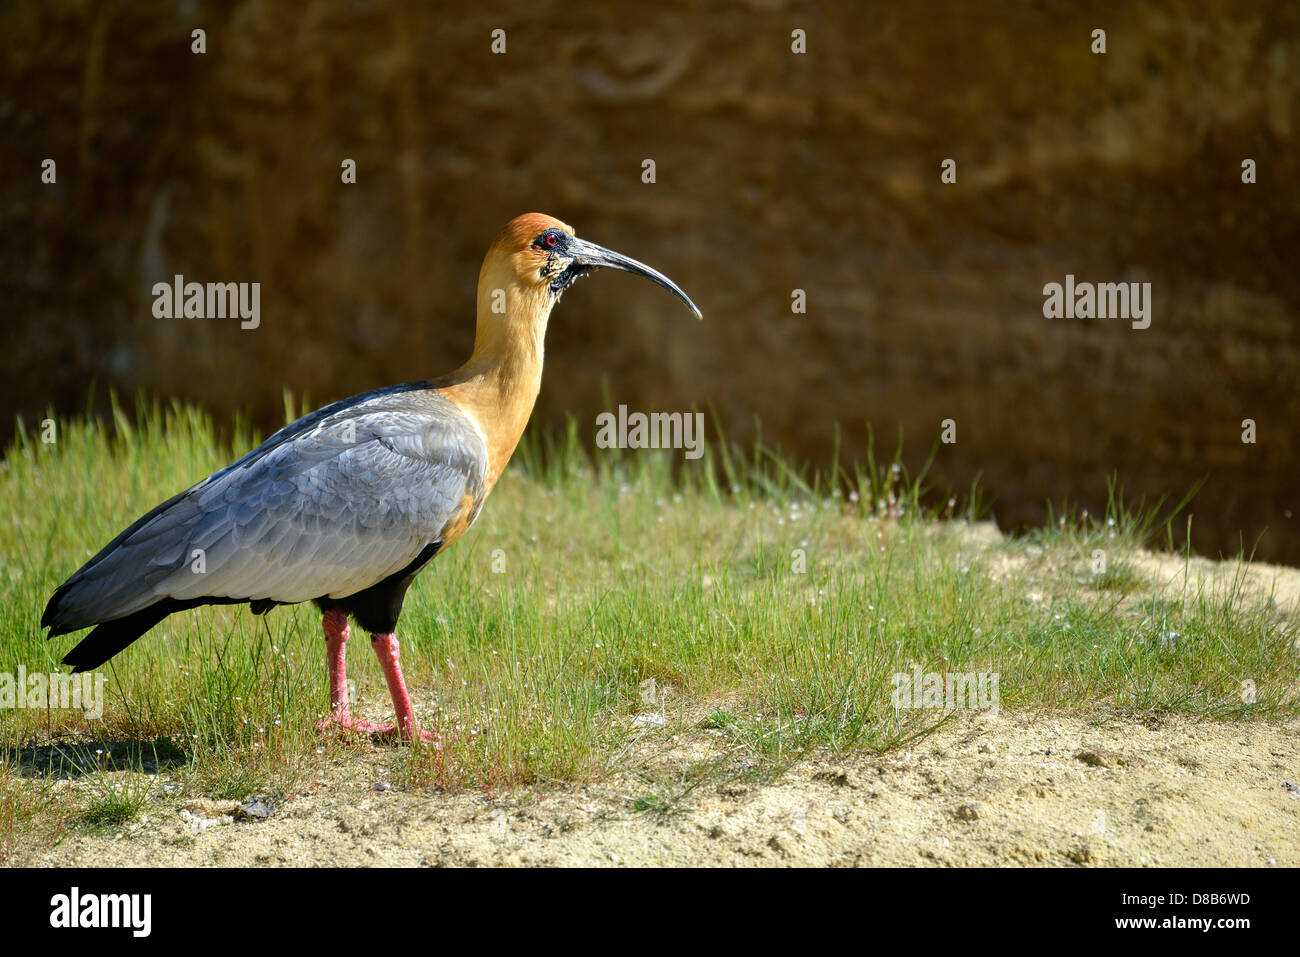 Profile Black-faced Ibis (Theristicus melanopis) standing on grass Stock Photo